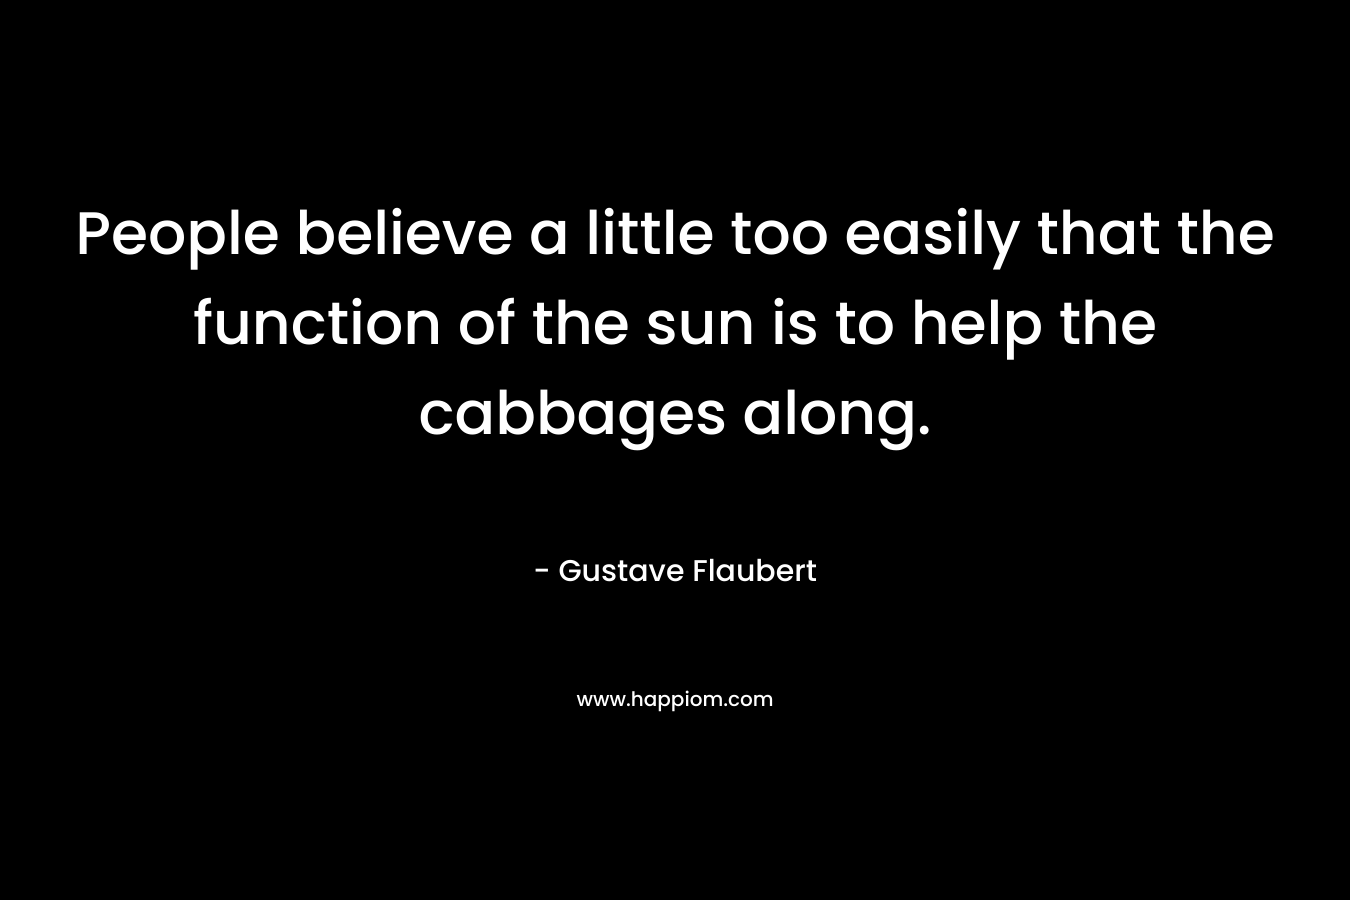 People believe a little too easily that the function of the sun is to help the cabbages along.